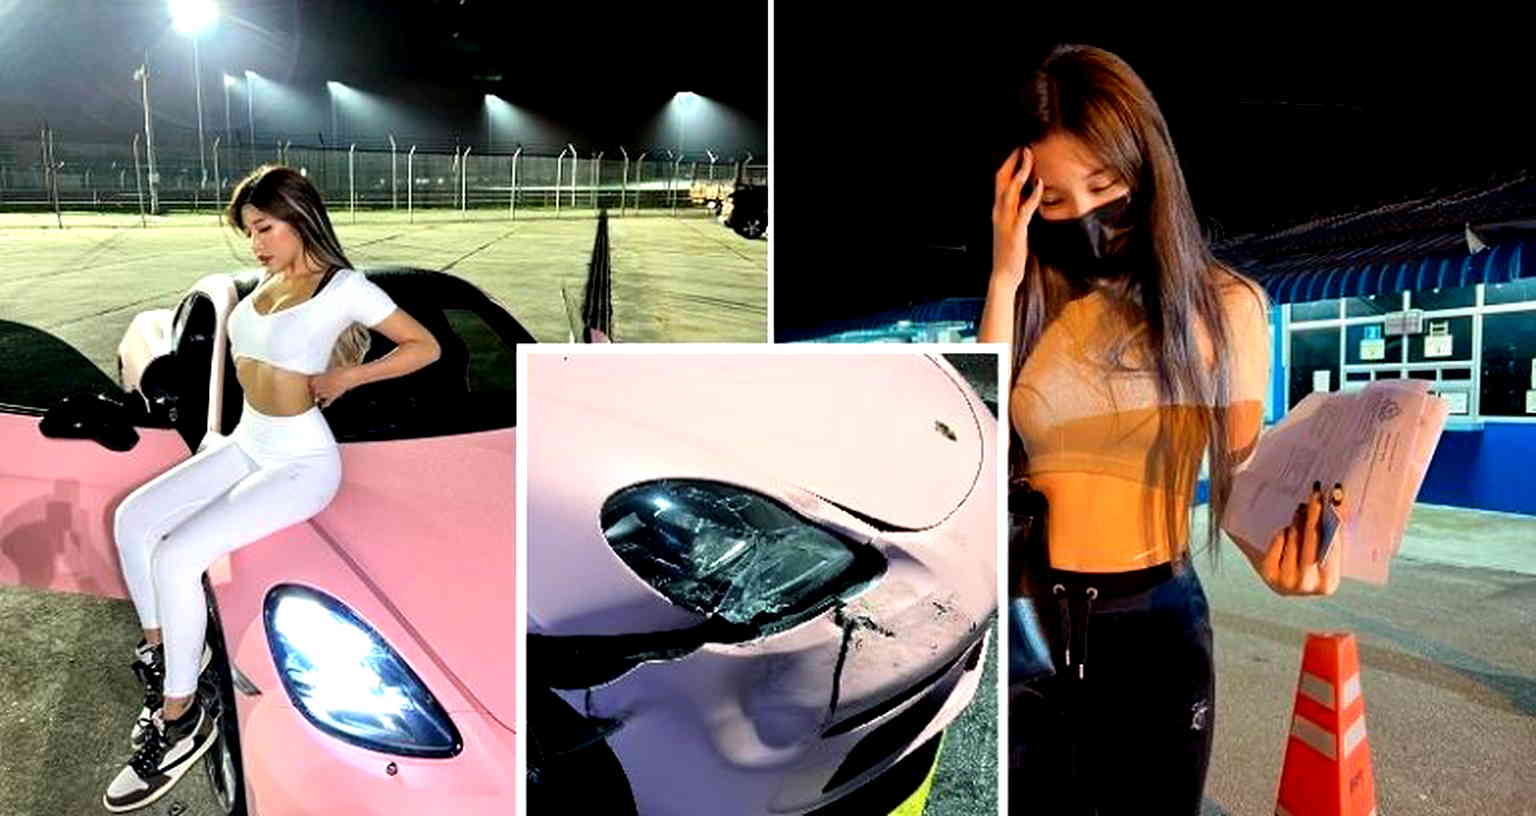 Malaysian influencer who faced backlash for wearing áo dài with no pants crashes Porsche